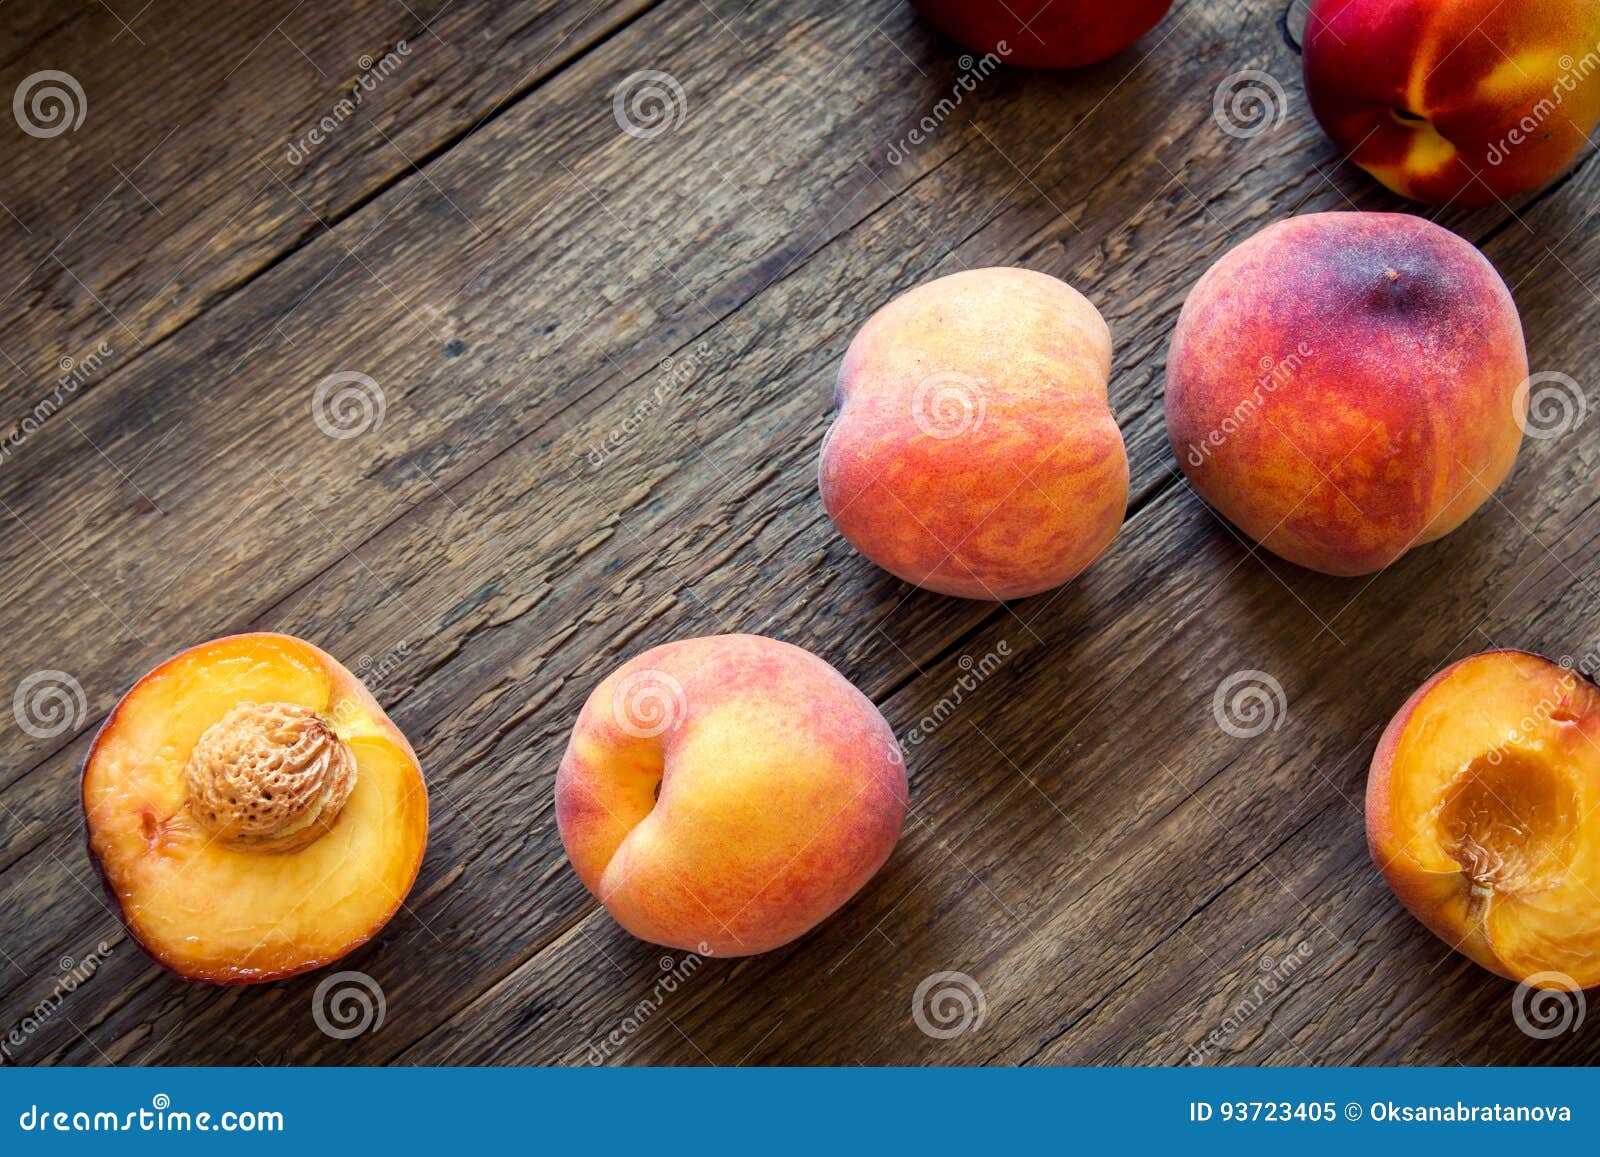 Fresh Organic Peaches on rustic wooden background with copy space. Sweet summer peaches.